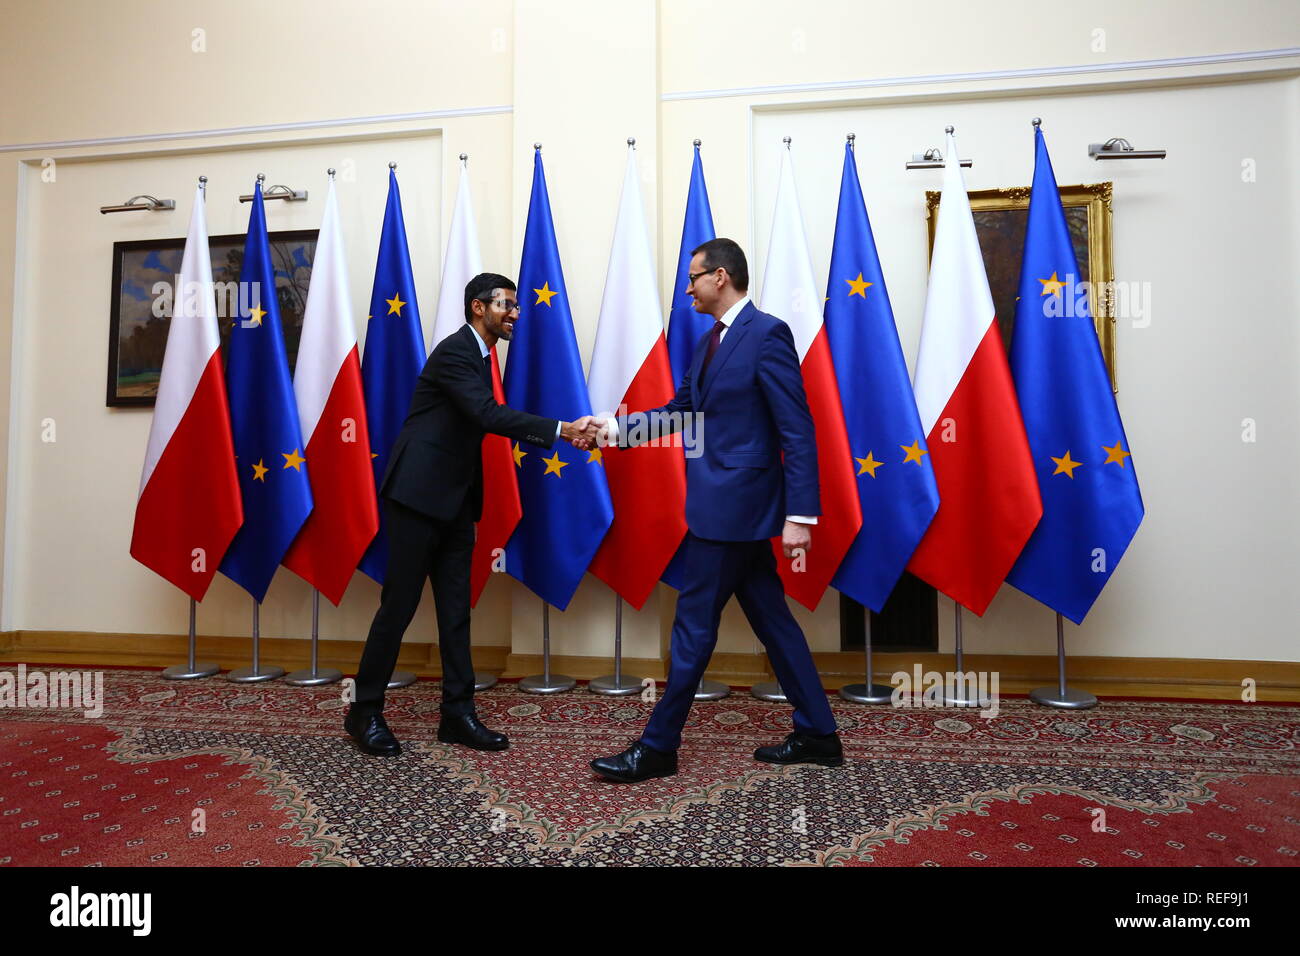 Warsaw, Poland. 21st Jan, 2019. Google CEO Sundararajan Pichai (L) meets with Polish Prime Minister Mateusz Morawiecki (R) in Warsaw. Pichai visits Poland to participate in the 'Central and Eastern Innotvation Roundtable'. Credit: Jakob Ratz/Pacific Press/Alamy Live News Stock Photo